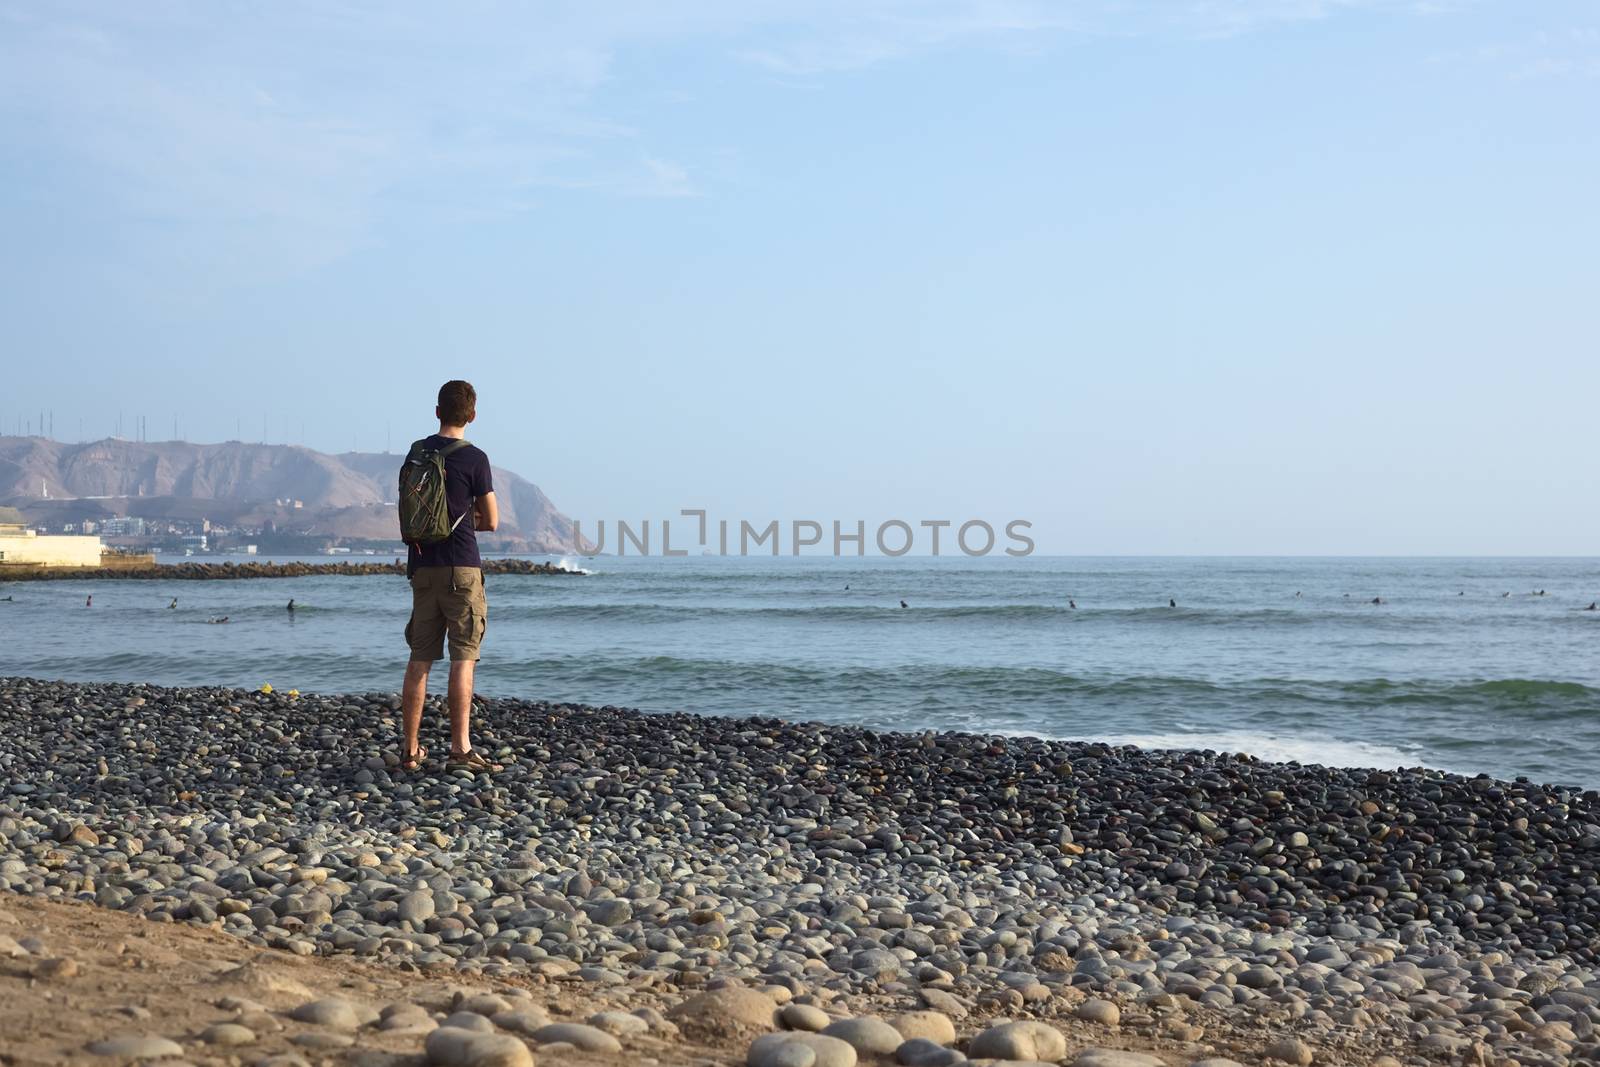 LIMA, PERU - APRIL 2, 2012: Unidentified young man standing on the rocky Pacific coast of Miraflores watching in the direction of the district of Chorrillos on April 2, 2012 in Lima, Peru. 